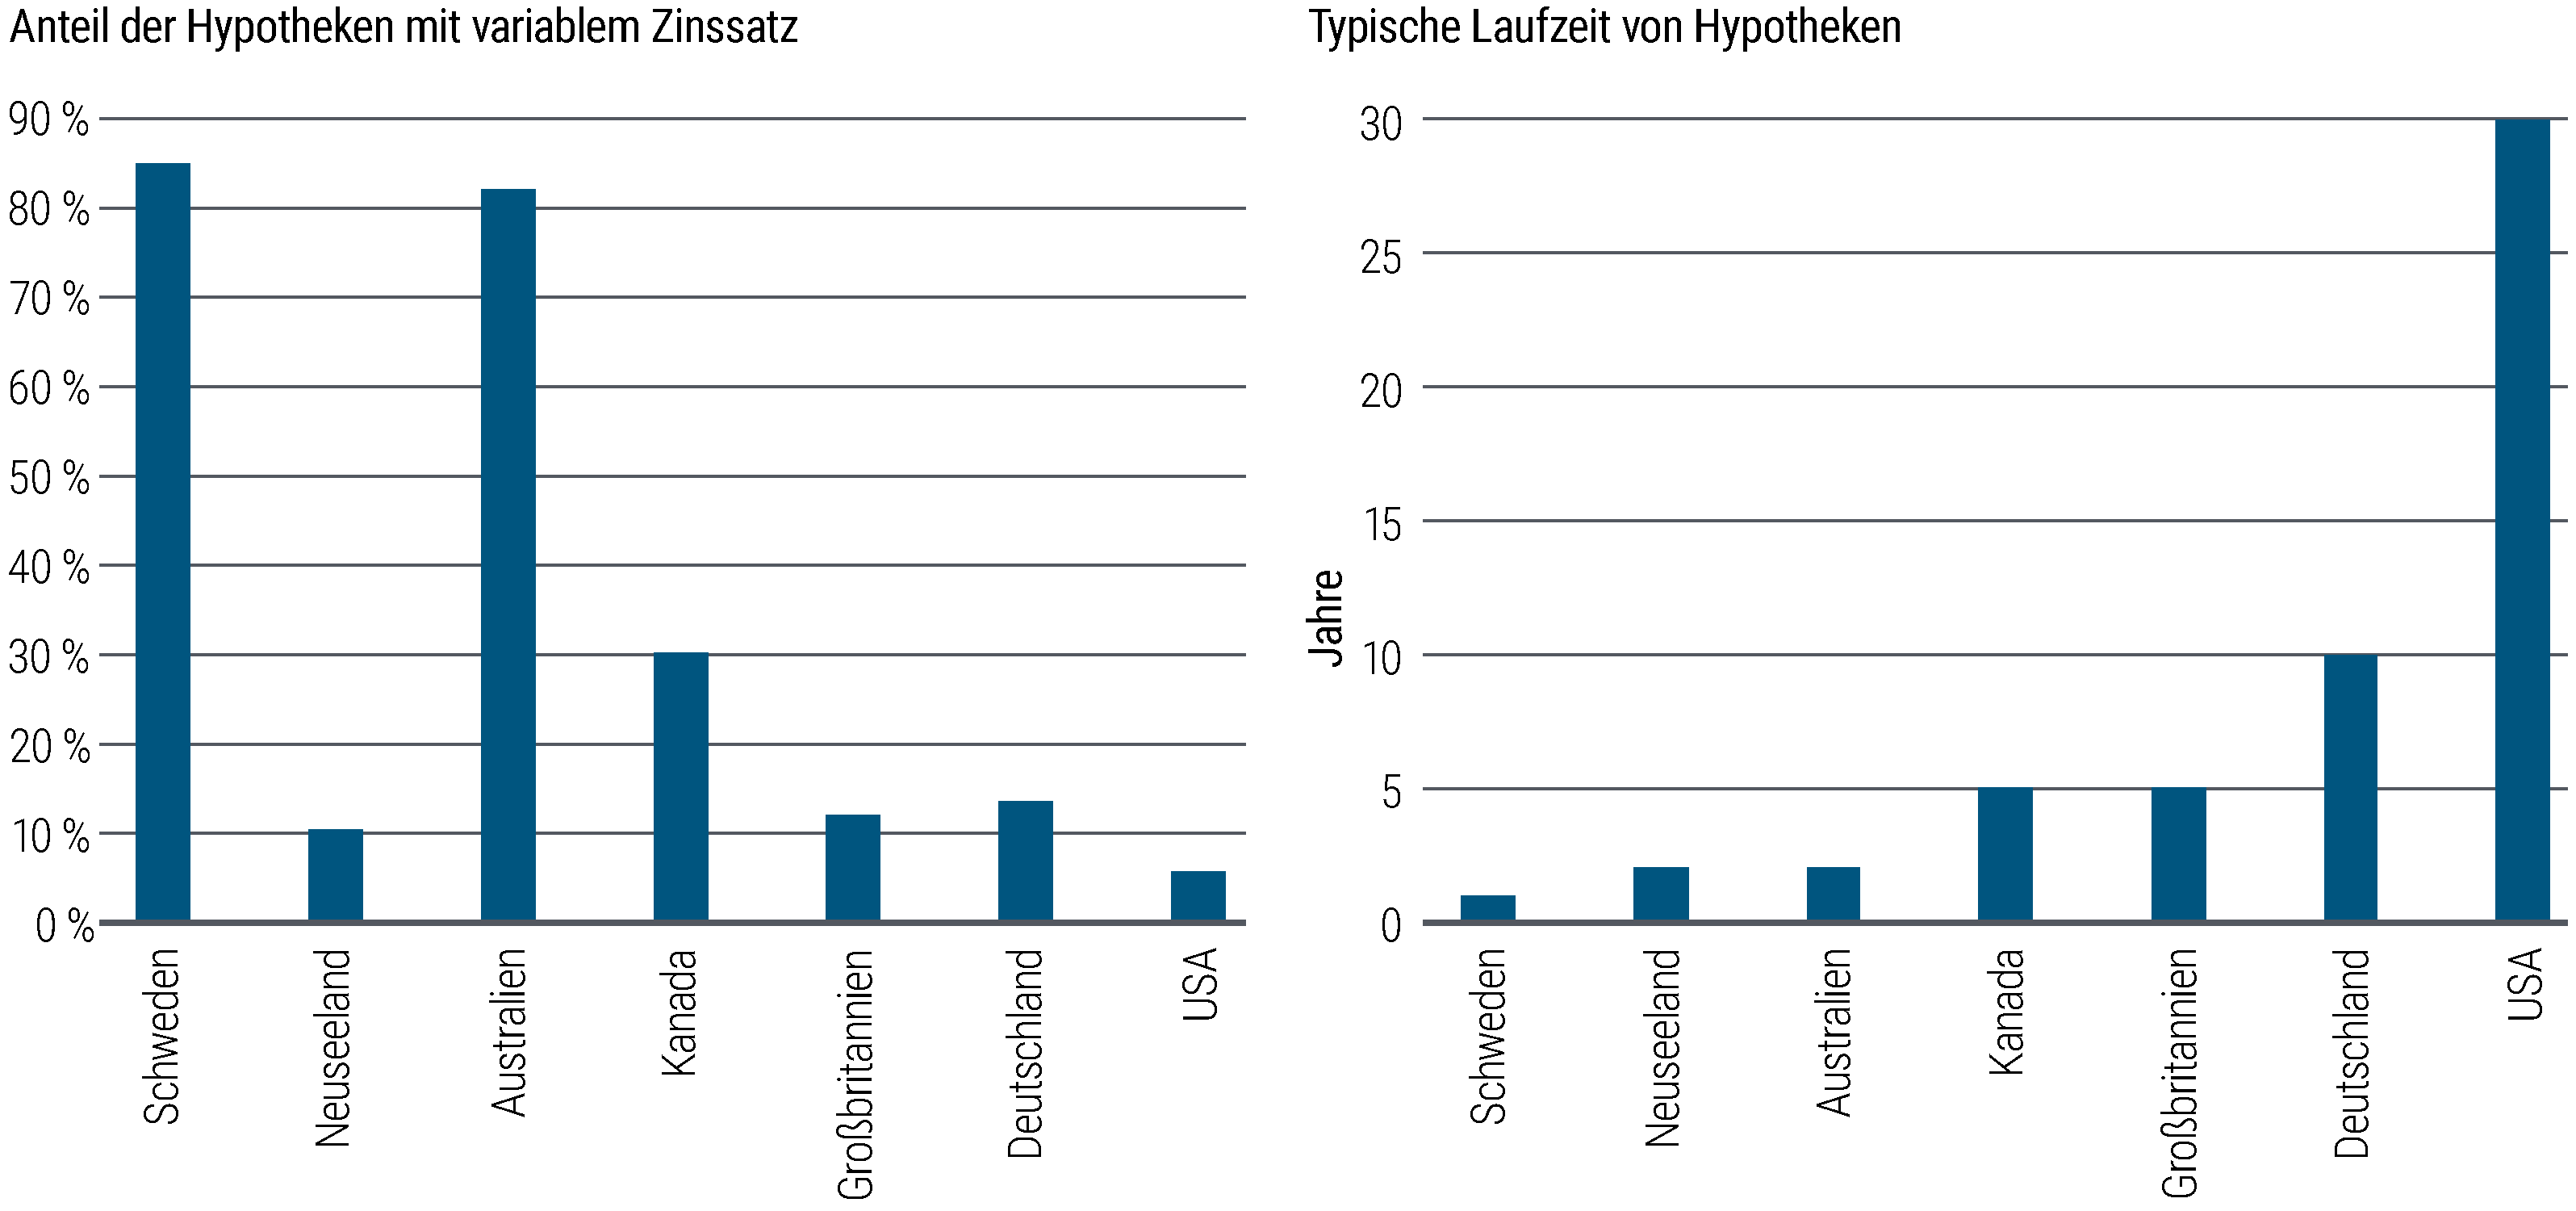 Figure 3 is two bar charts side by side. The left side shows the share of mortgages that are variable rate in several developed market countries (as a percentage of all mortgages). In Sweden and Australia, more than 80% are variable rate; around 30% in Canada; around 10%–15% in New Zealand, Germany, and the U.K., and about 6% in the U.S.  The right side shows the typical term length of mortgages in these same countries: 1 year in Sweden, 2 years in Australia and New Zealand, 5 years in the U.K. and Canada, 10 years in Germany, and 30 years in the U.S. The source of the data is regional statistics offices and central banks as of September 2023.T